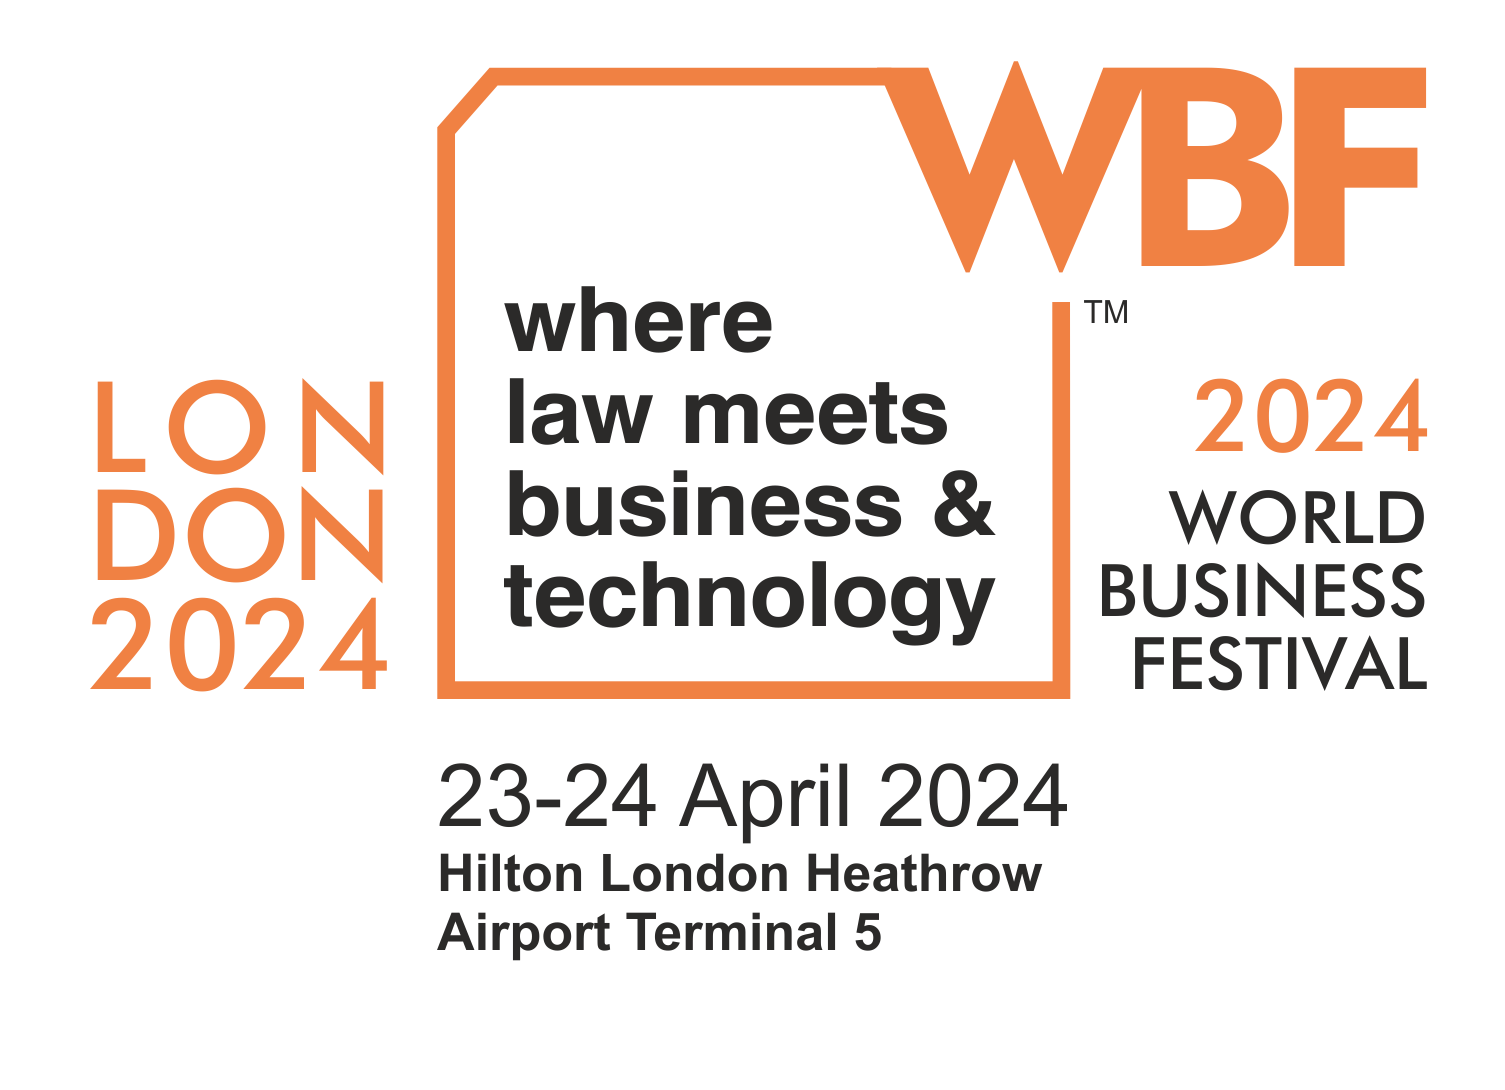 World Business Fest 2024 London Set to Host Premier Law, Business, and